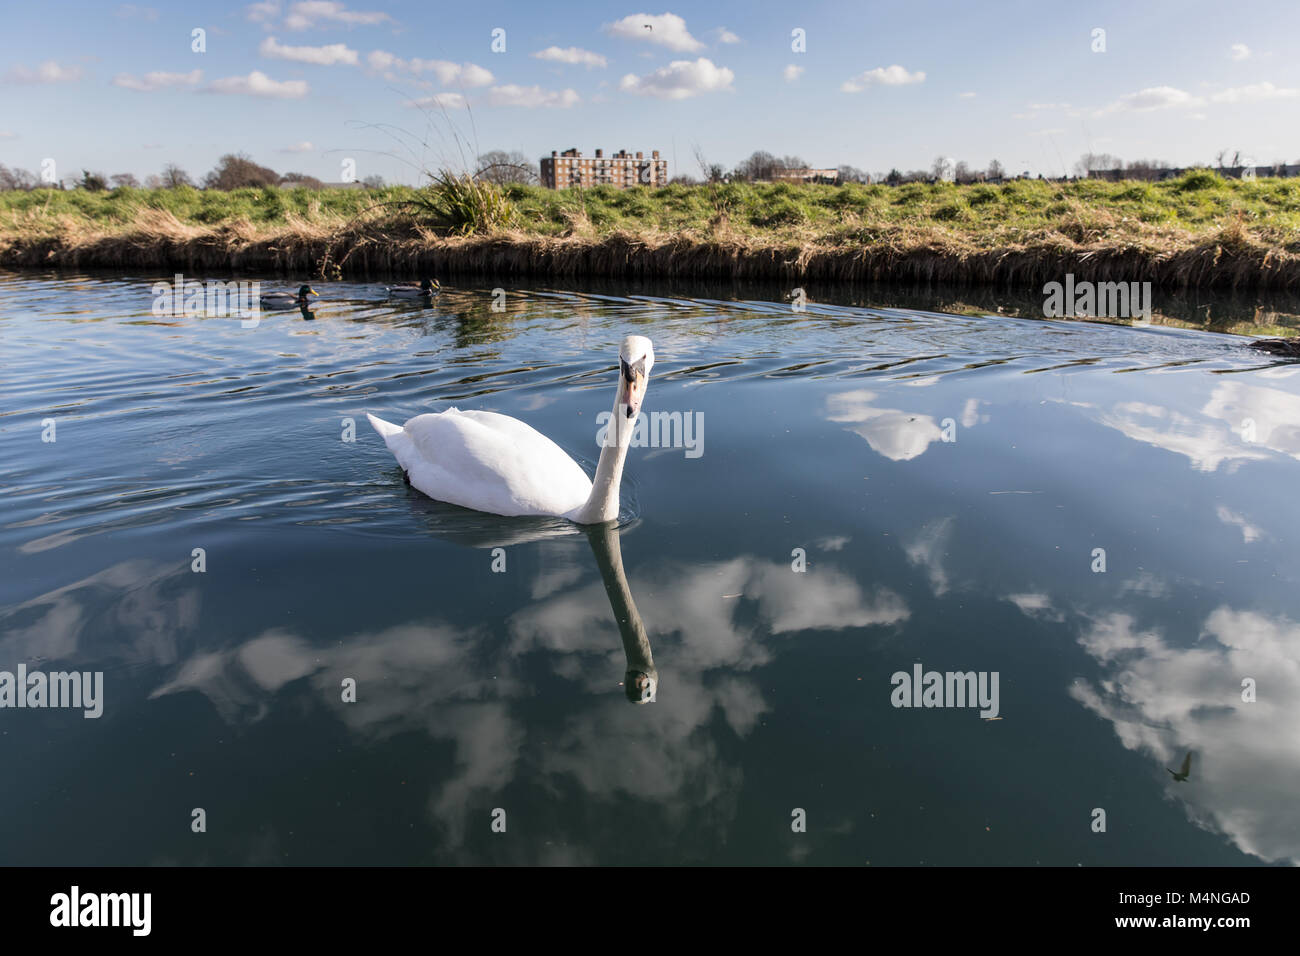 London. 17th Feb, 2018. UK Weather. Beautiful weather in Hackney, London, UK, 17th February, 2018. Swans in the waterway next to West Reservoir, Stoke Newington. Credit: carol moir/Alamy Live News Stock Photo